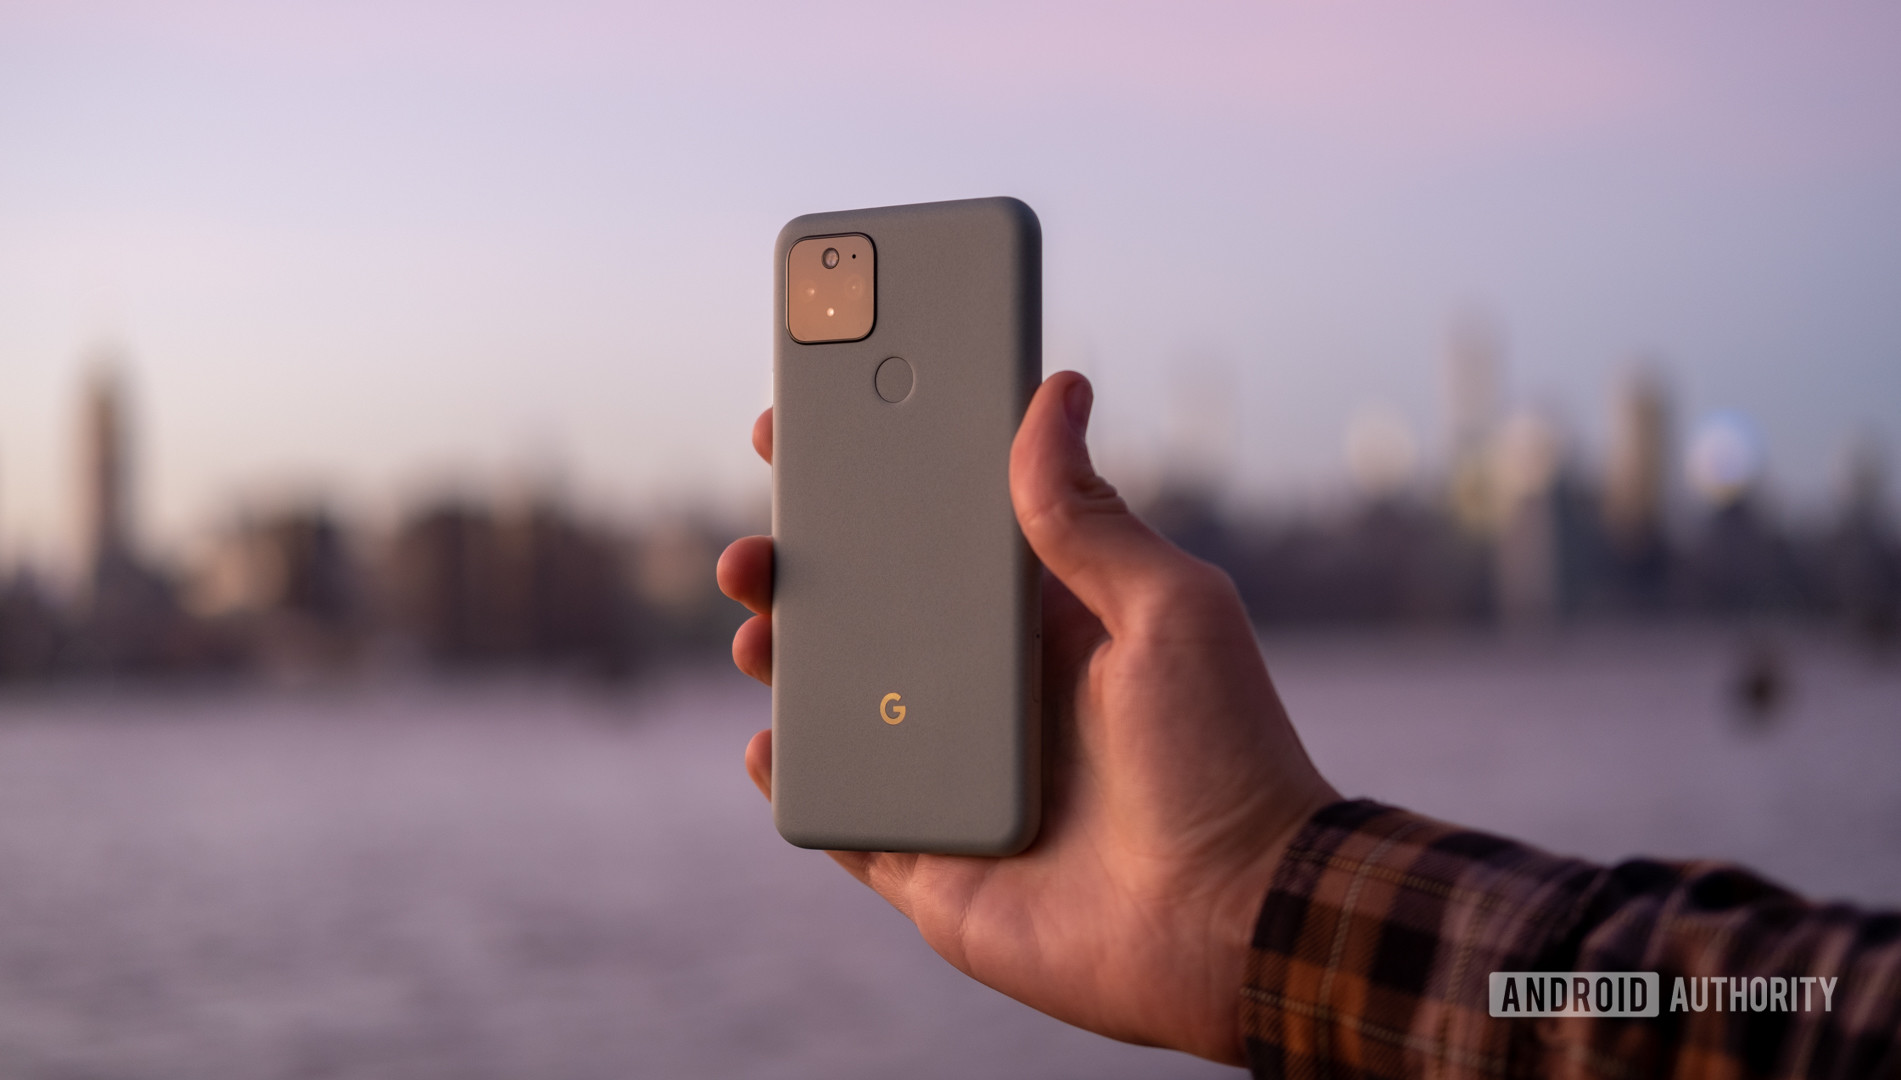 The weak Pixel 5 camera is giving up the crown, and more tech news today